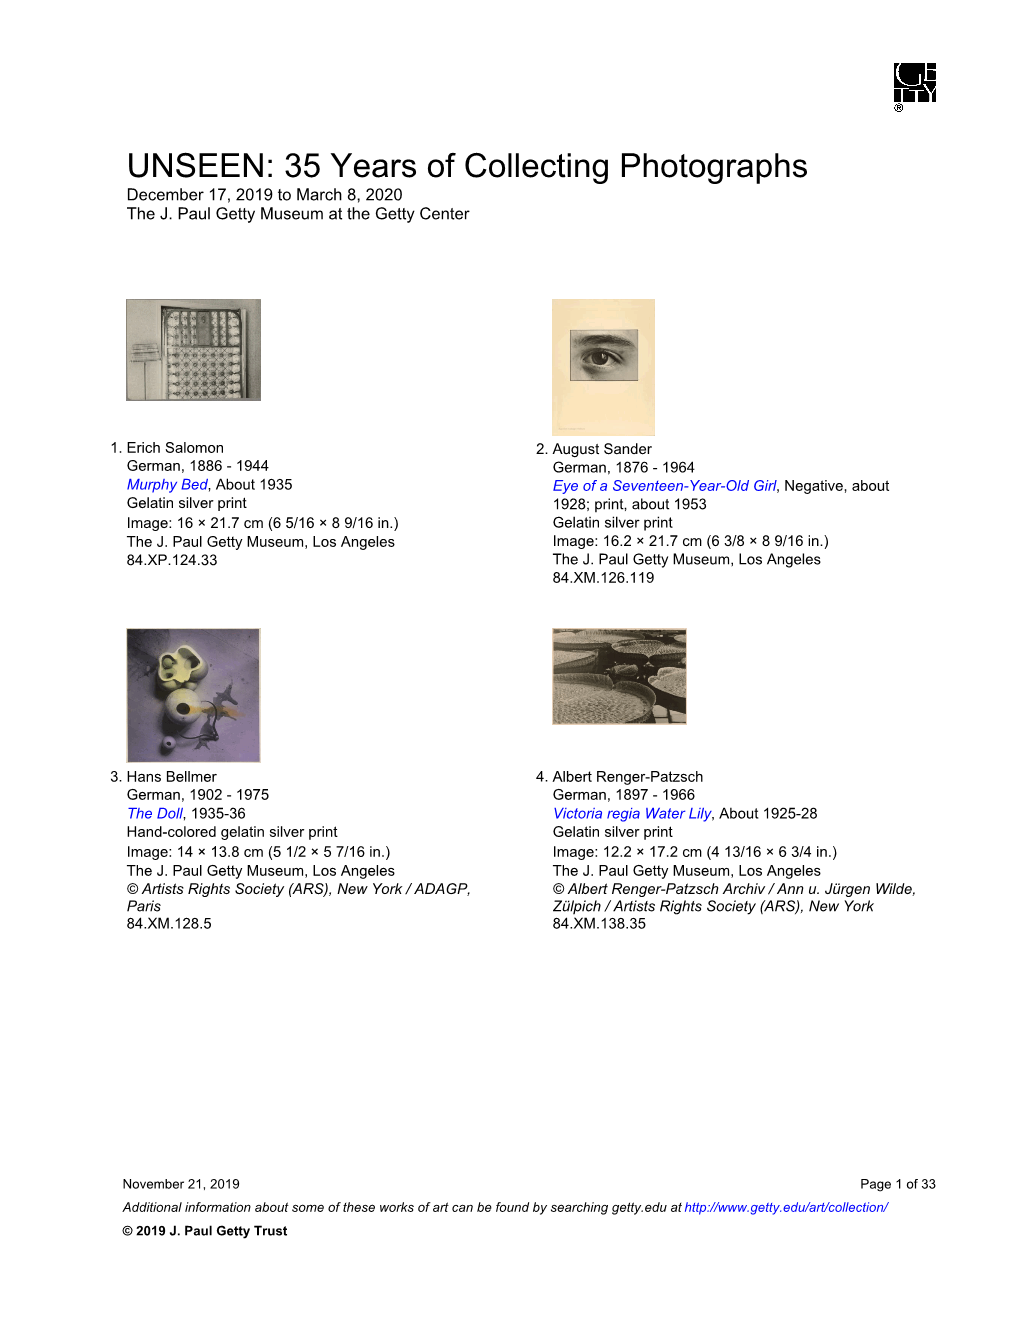 Download the Exhibition Object Checklist